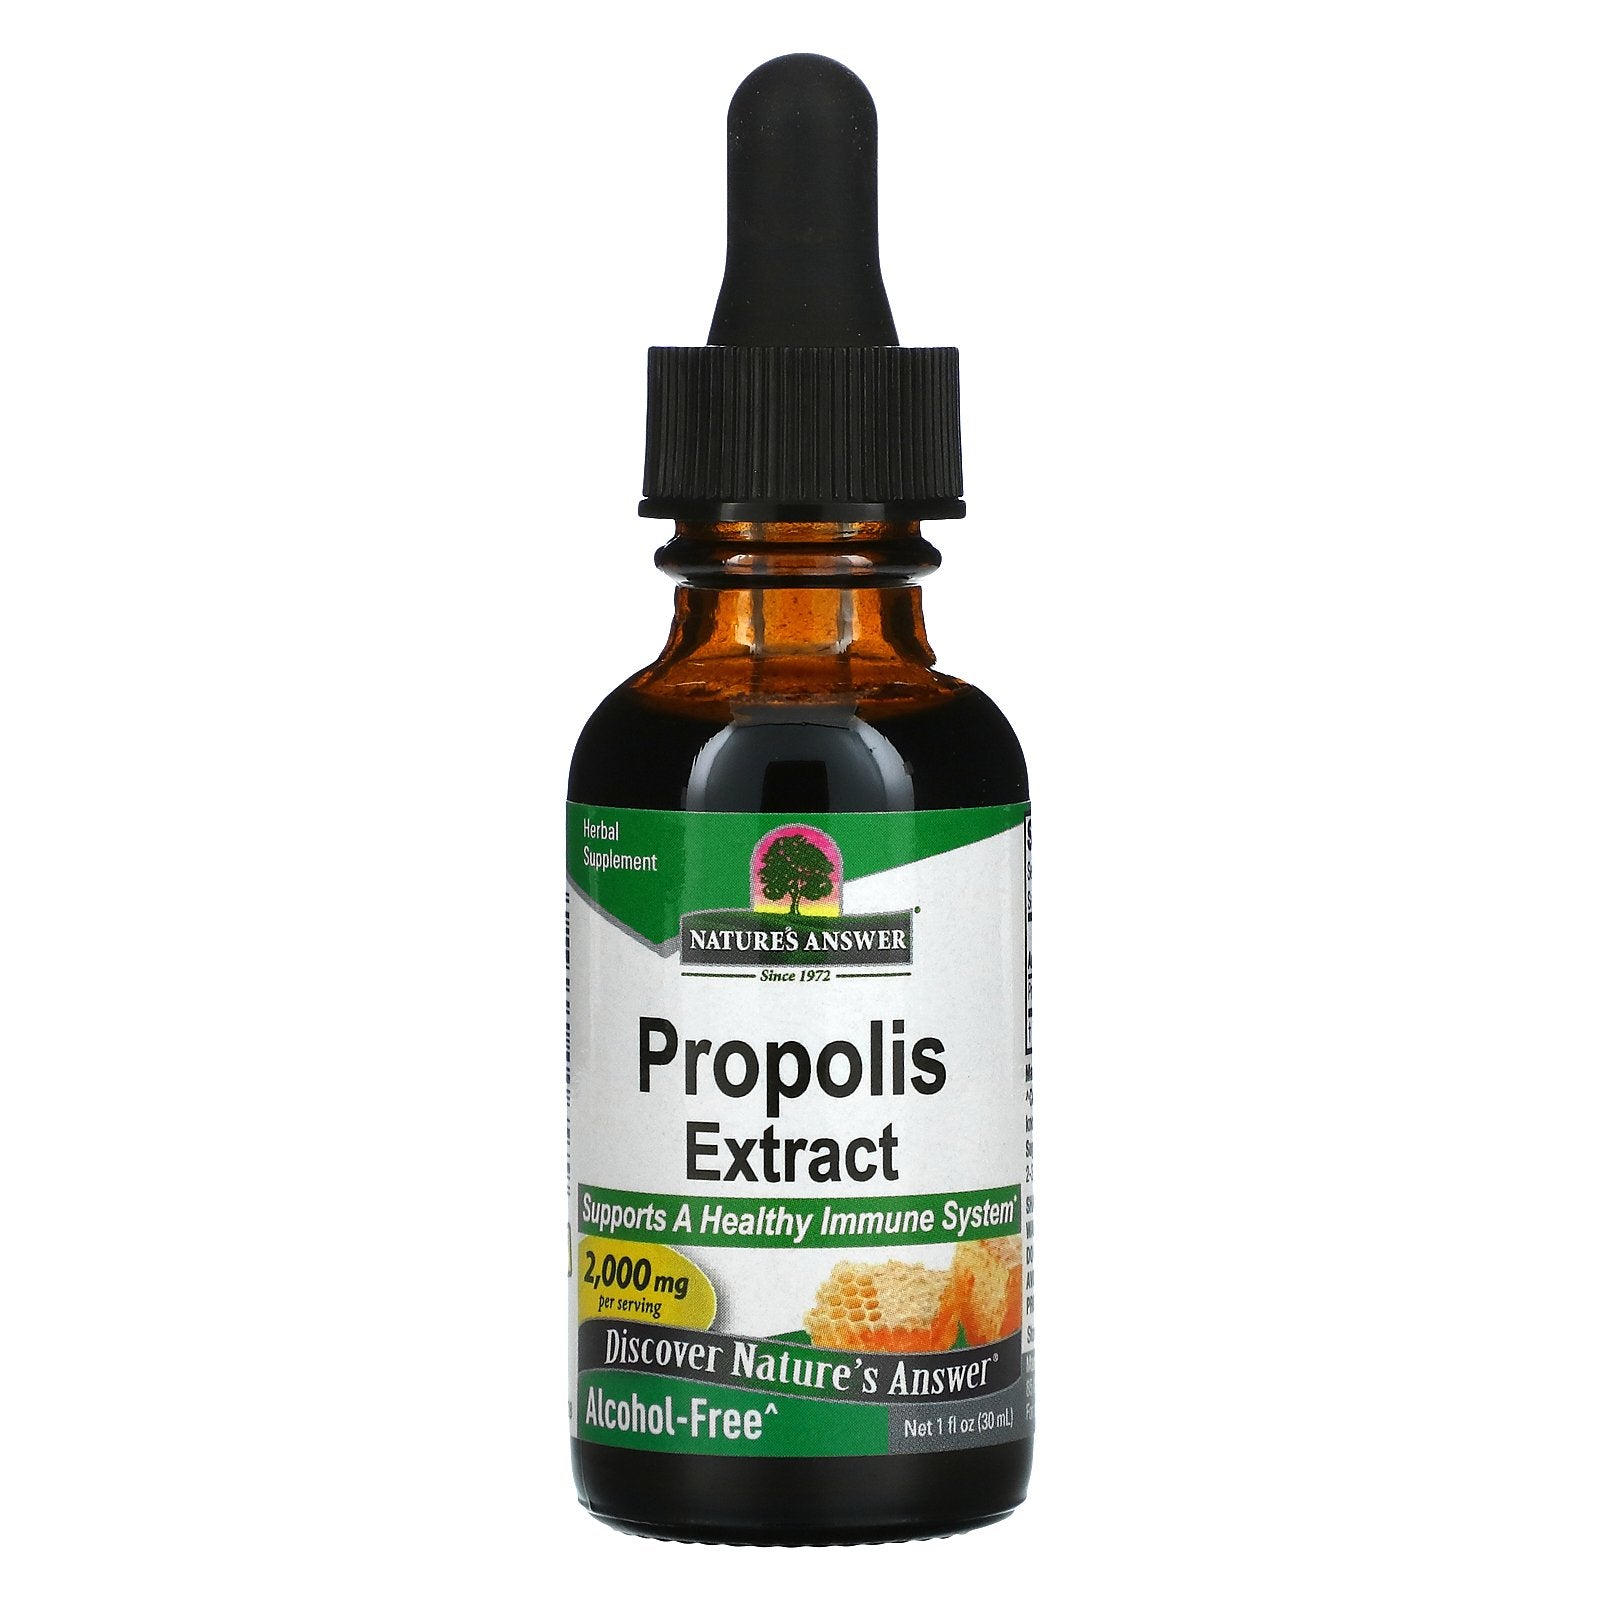 Nature's Answer, Propolis Extract, Alcohol-Free, 2,000 mg